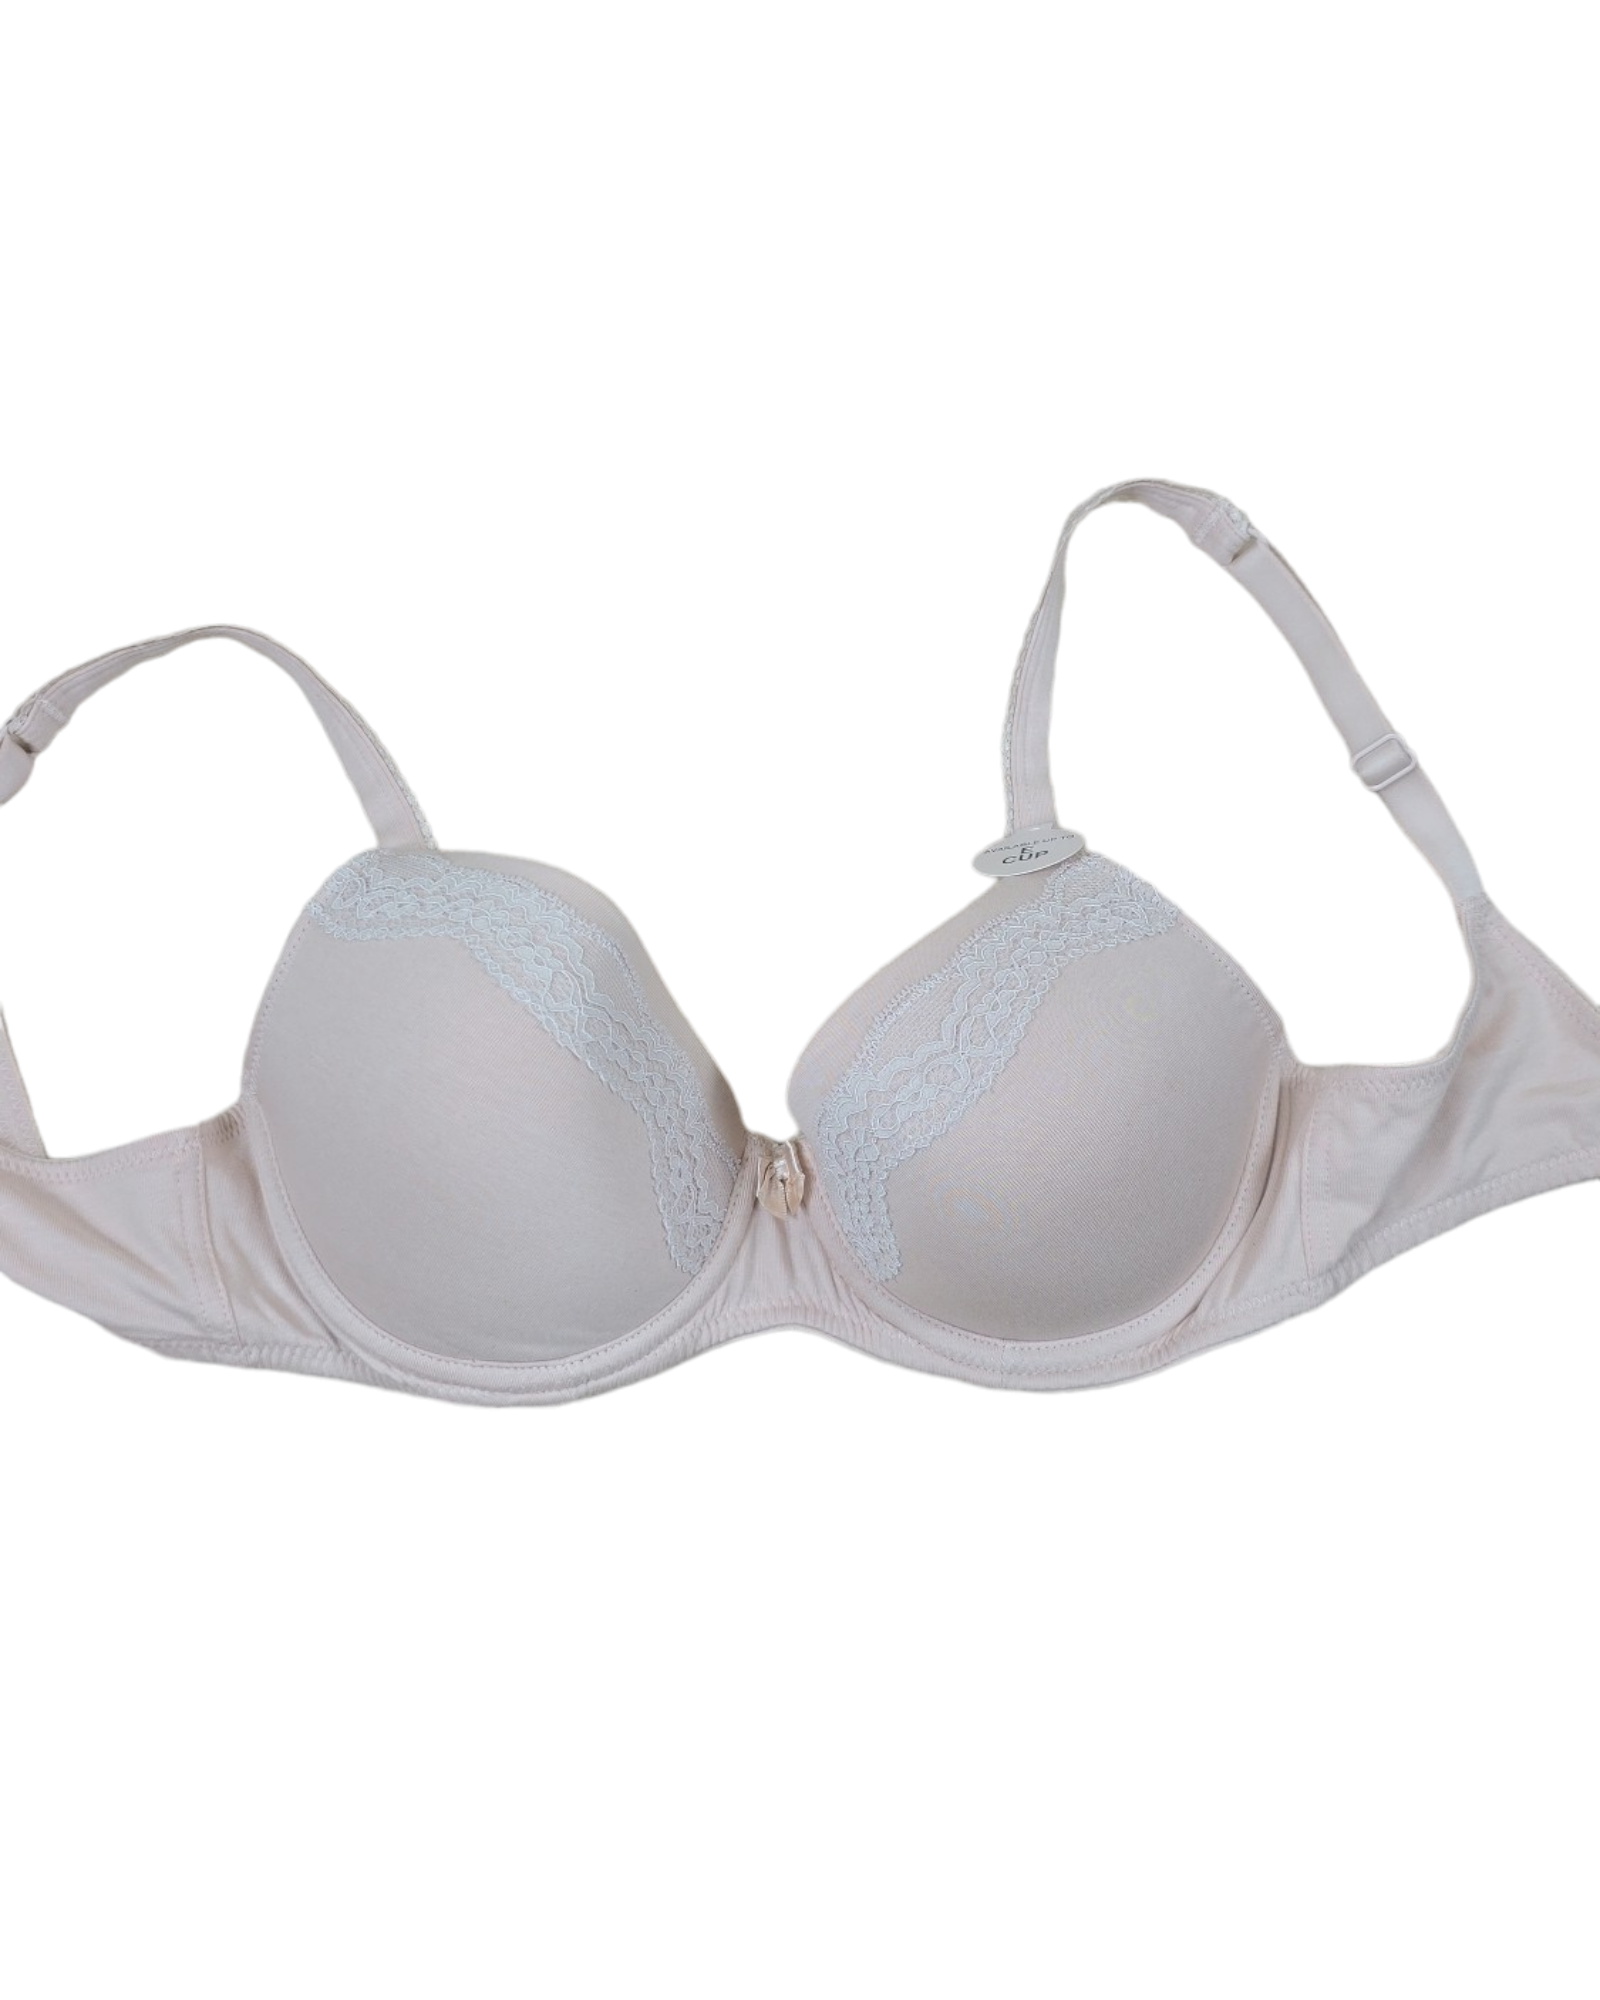 Light Padded Cotton Bra With Underwire